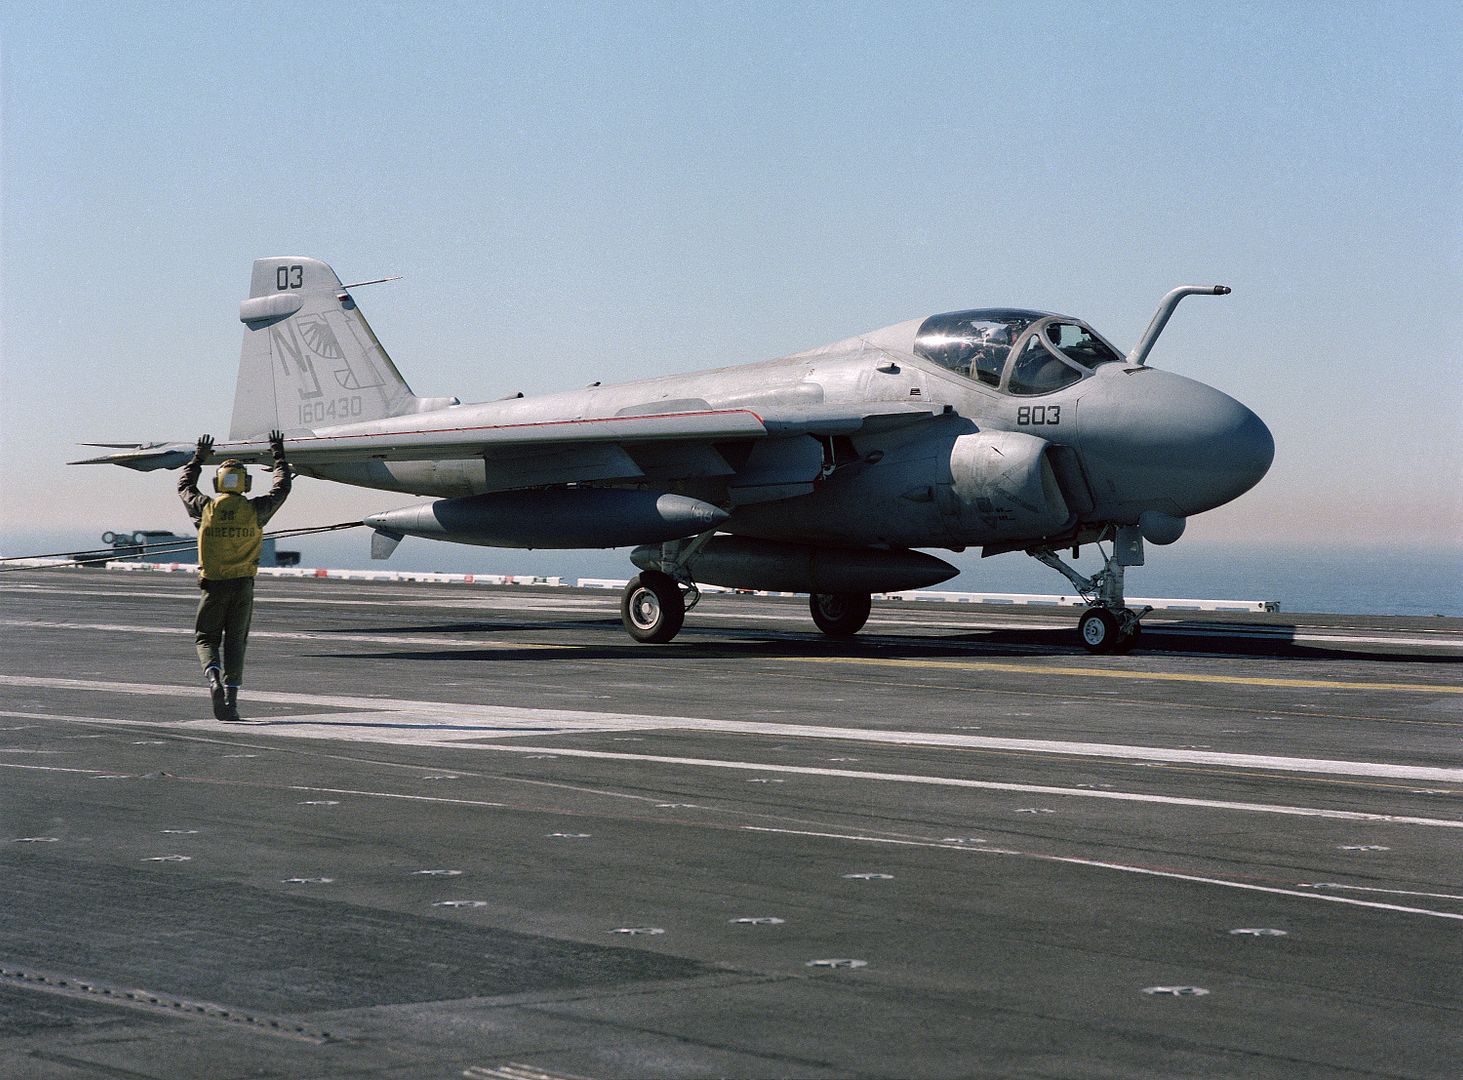 A Plane Director Signals To An A 6E Intruder Aircraft That Has Just Landed During Flight Operations Aboard The Nuclear Powered Aircraft Carrier USS CARL VINSON